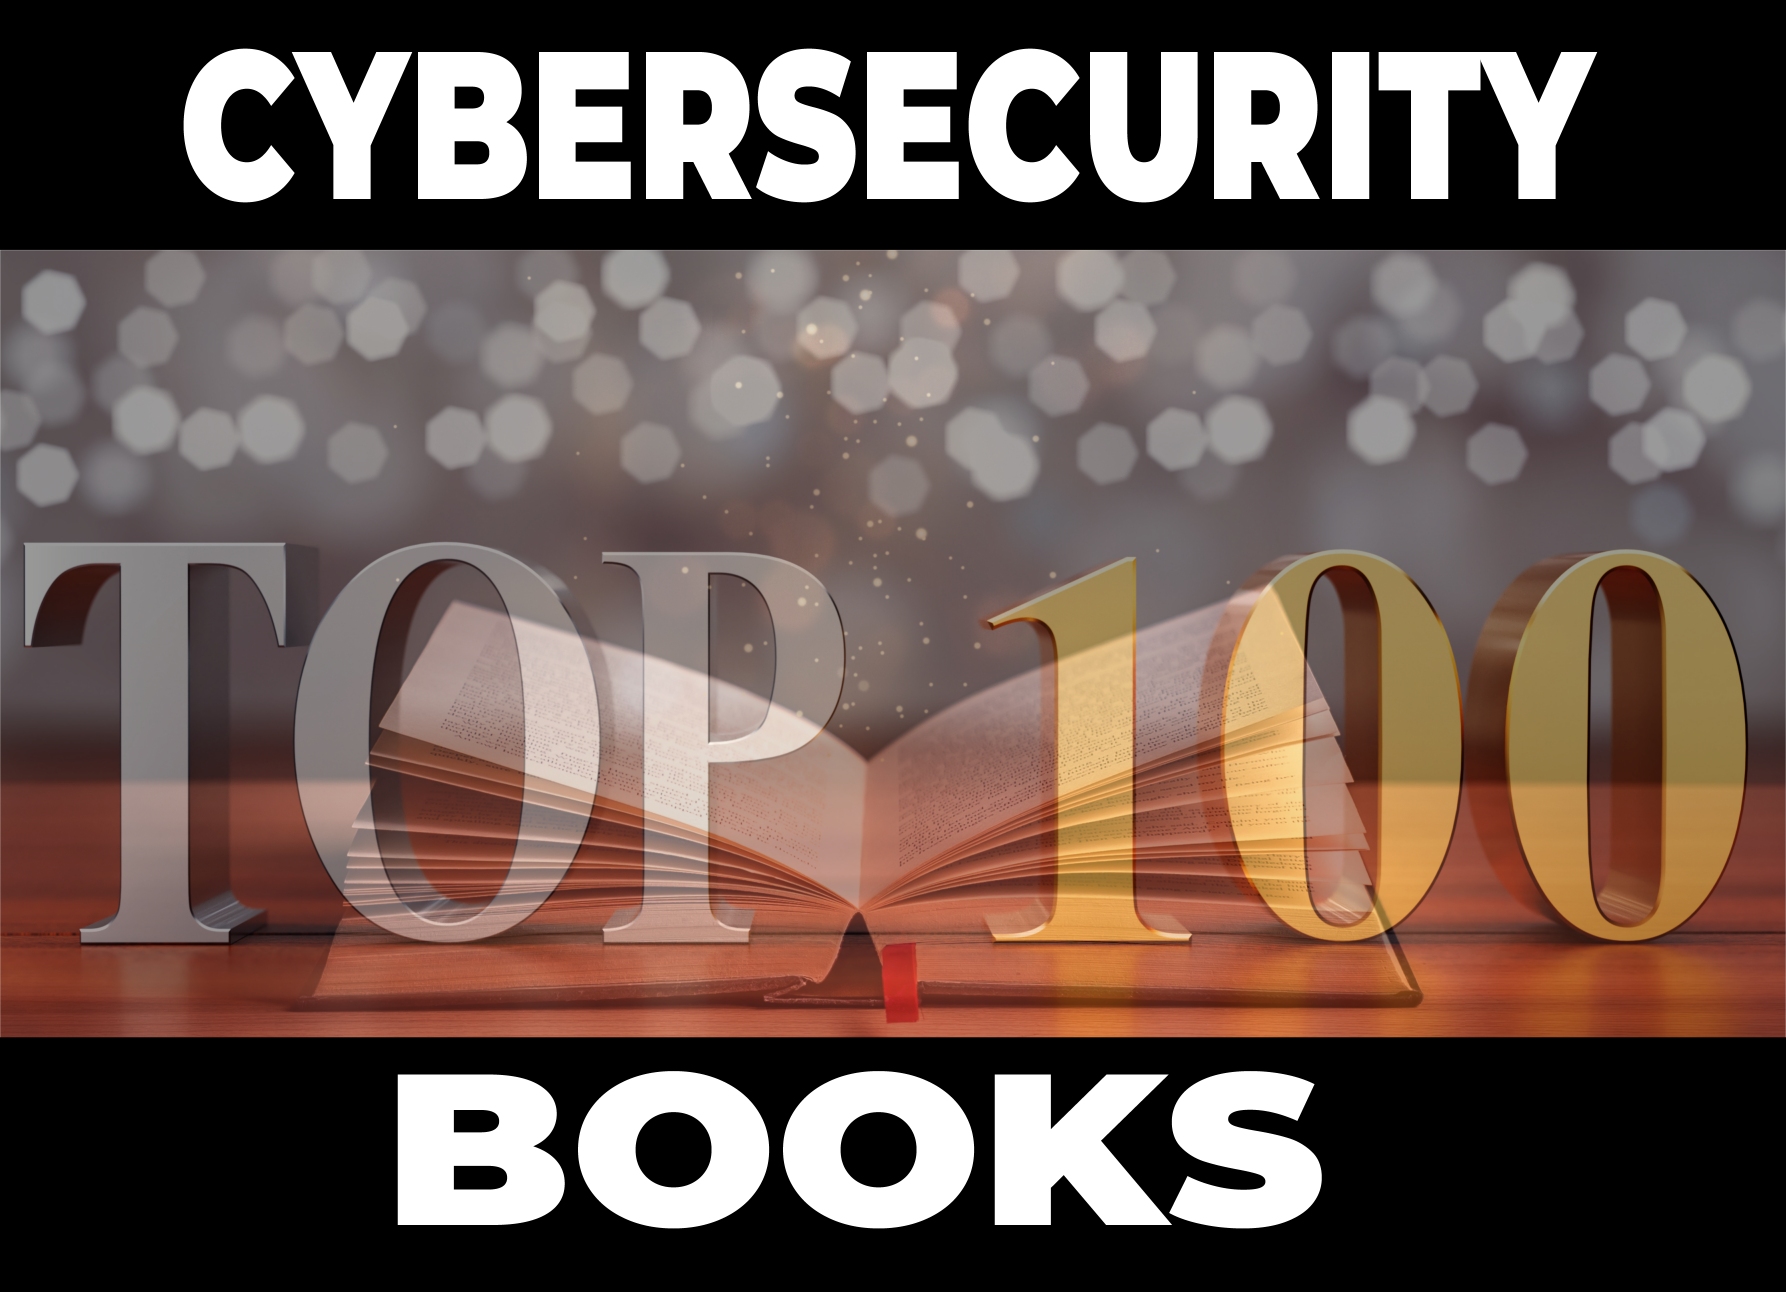 Top 100 Cybersecurity Books